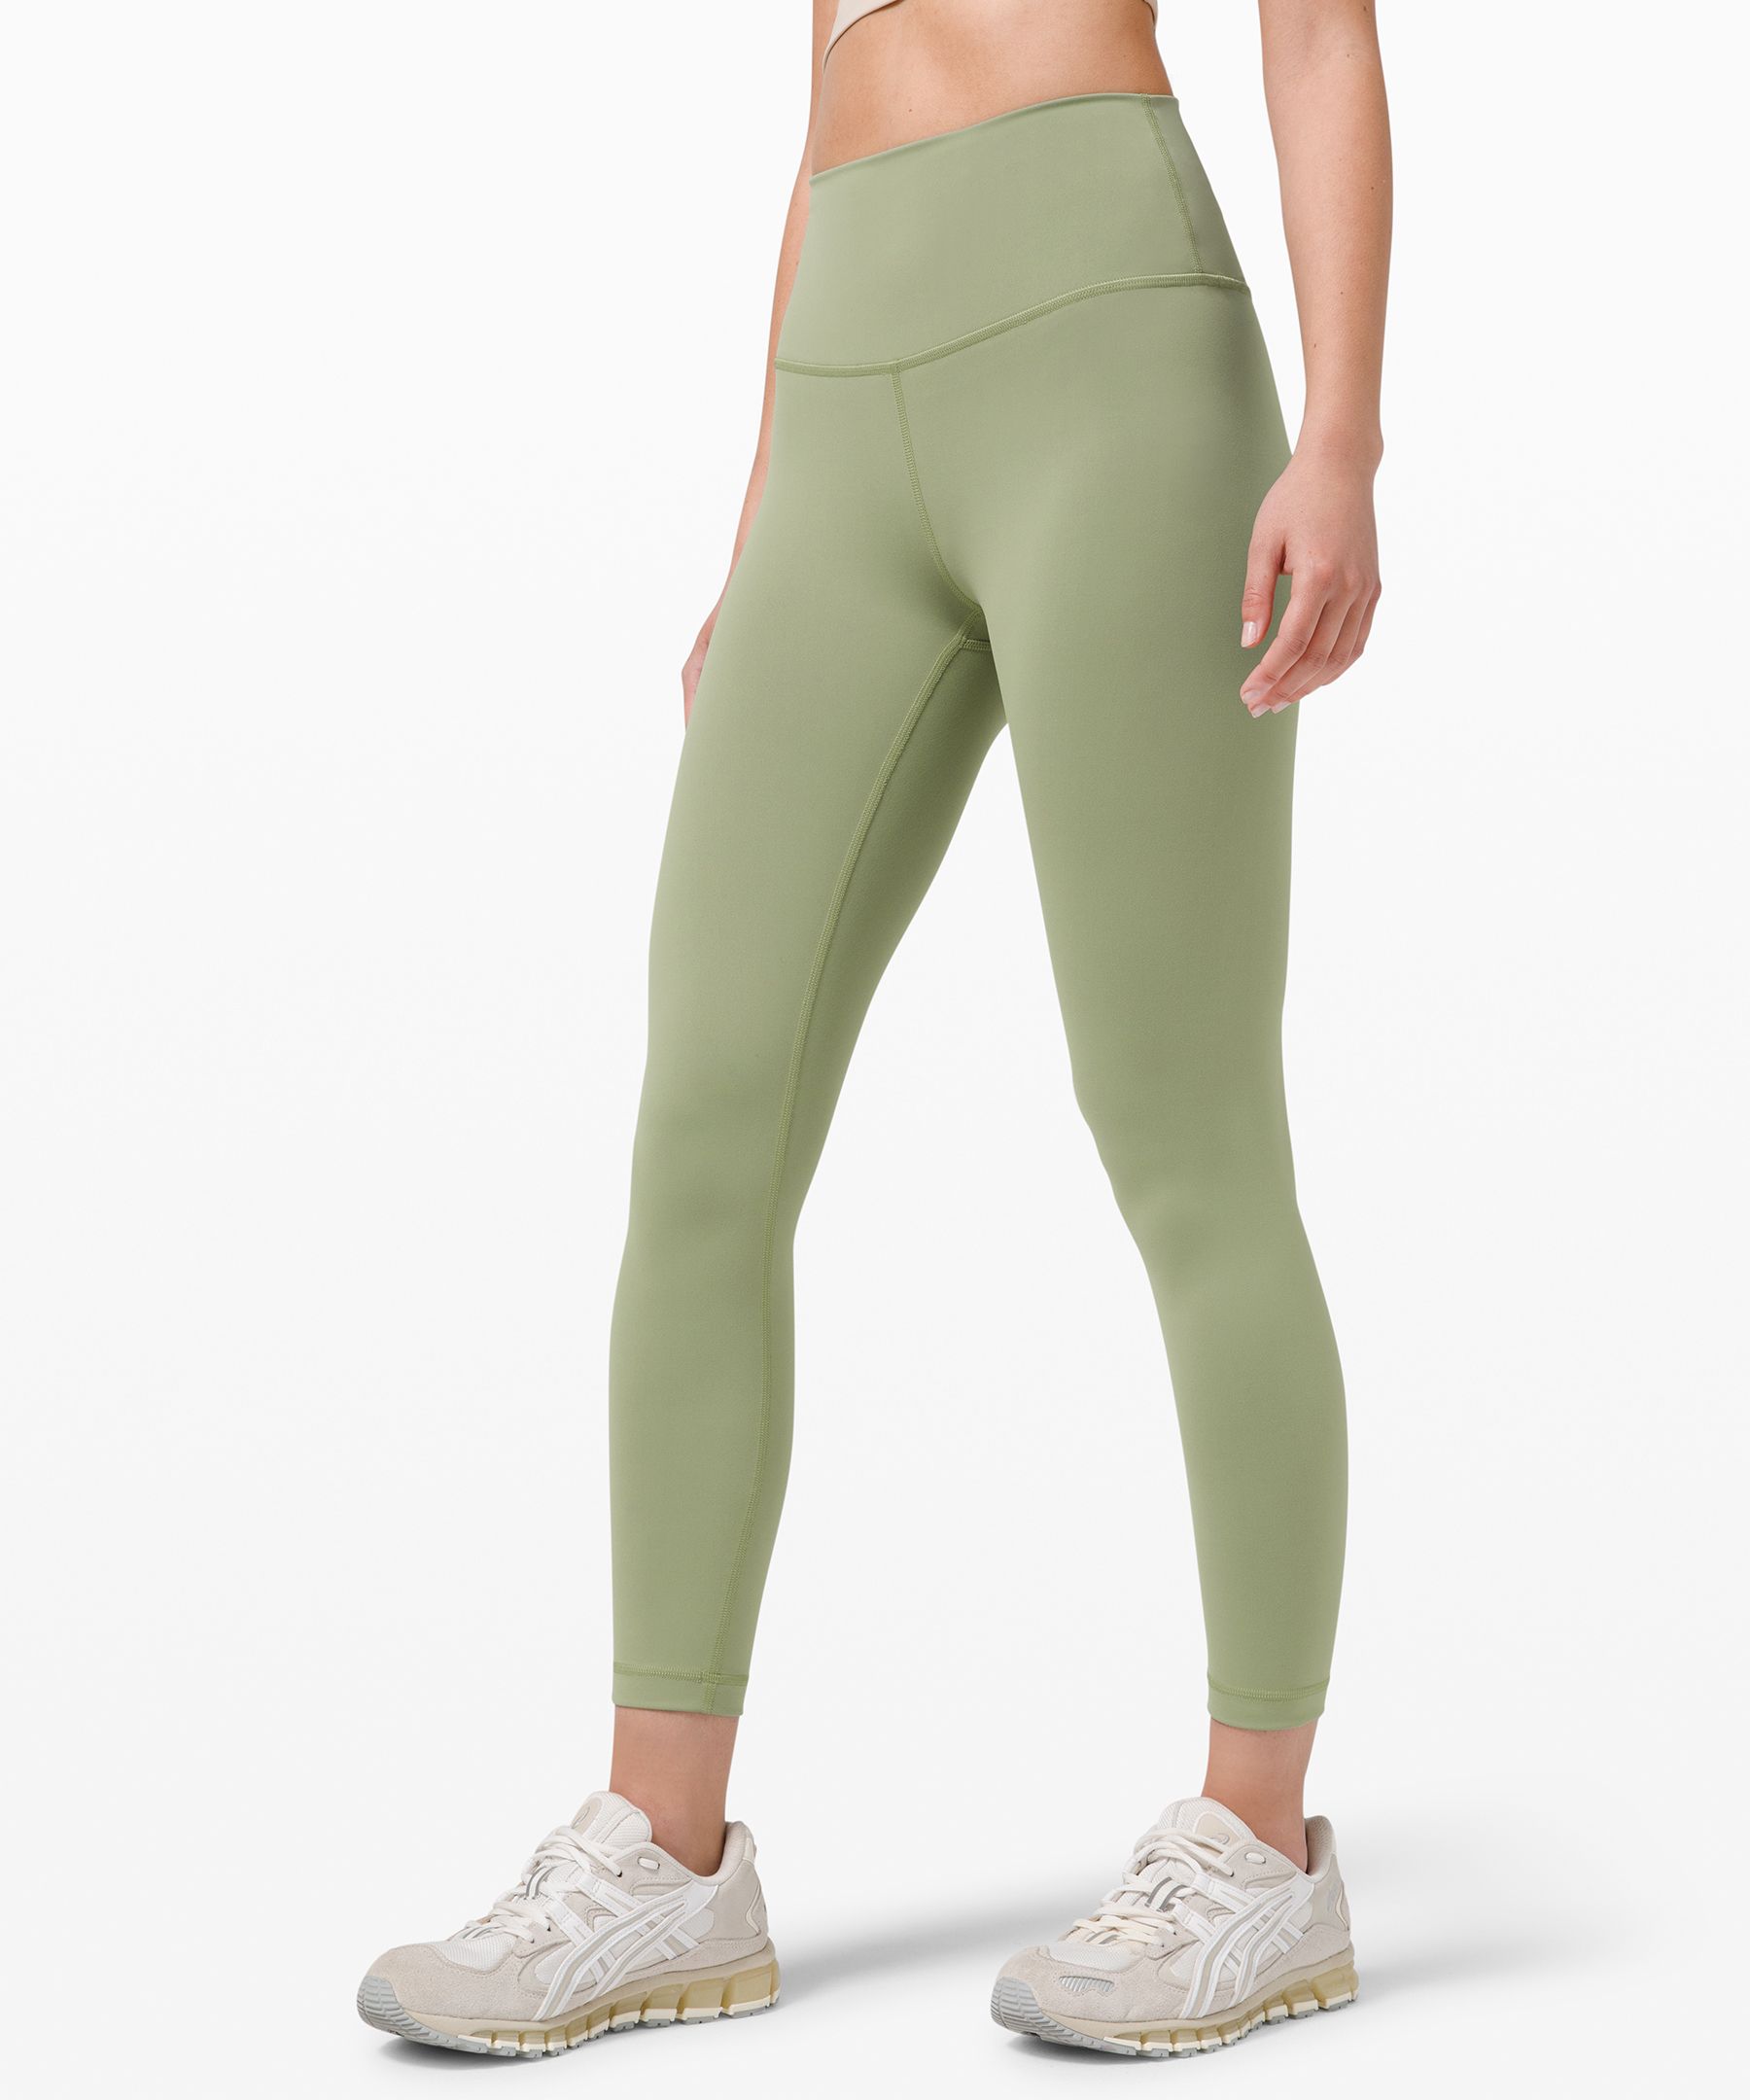 Lululemon Wunder Train High-rise Tights 25" In Willow Green